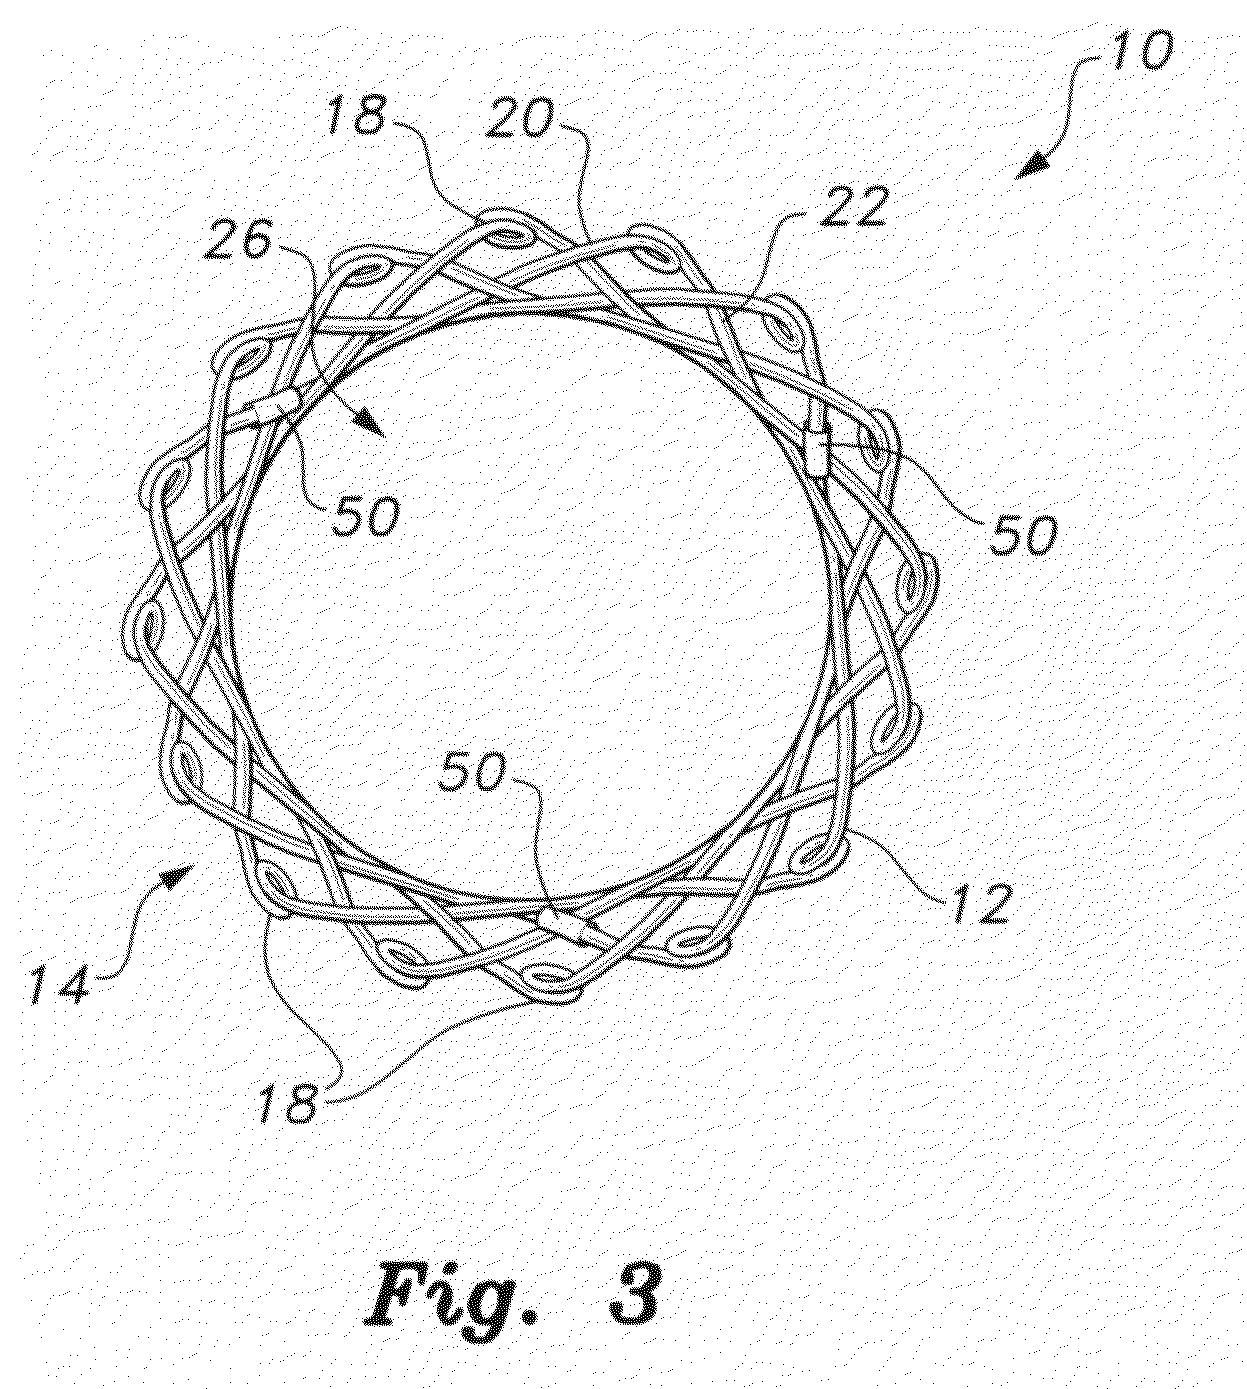 Self-expanding biodegradable stent